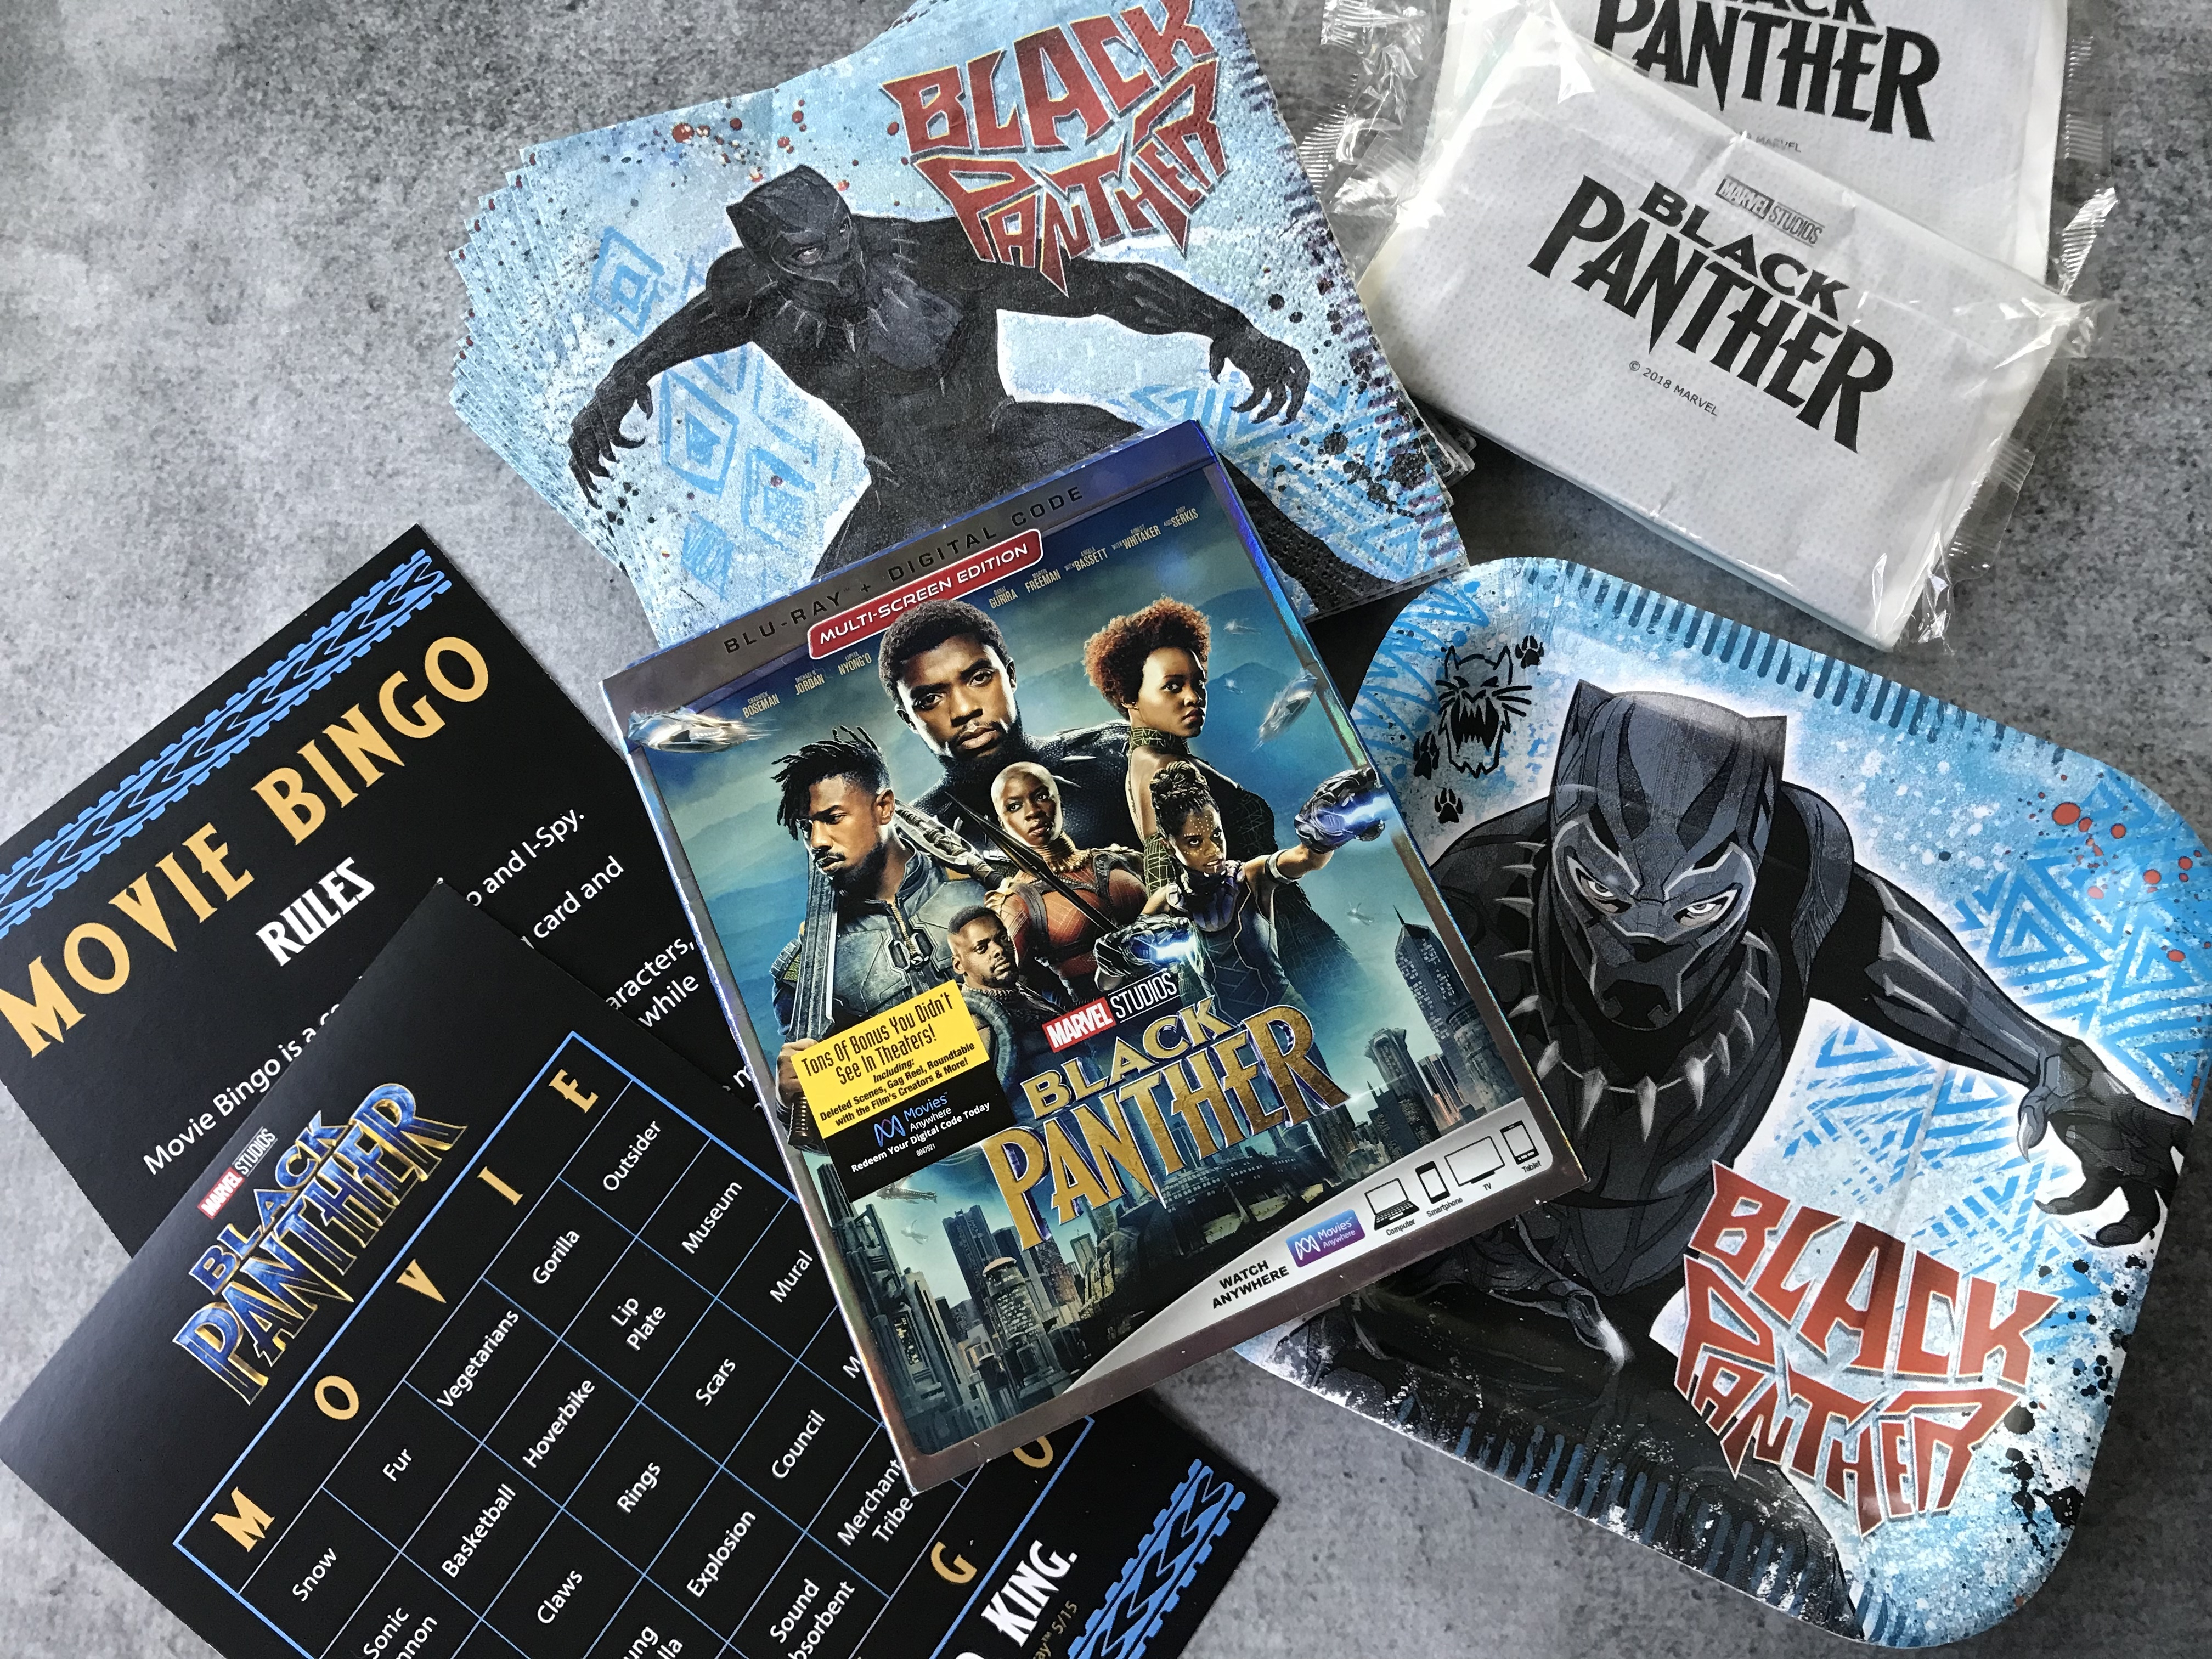 Tips for a Black Panther Movie Night, Black Panther BluRay, Black Panther Movie Night, Black Panther DVD